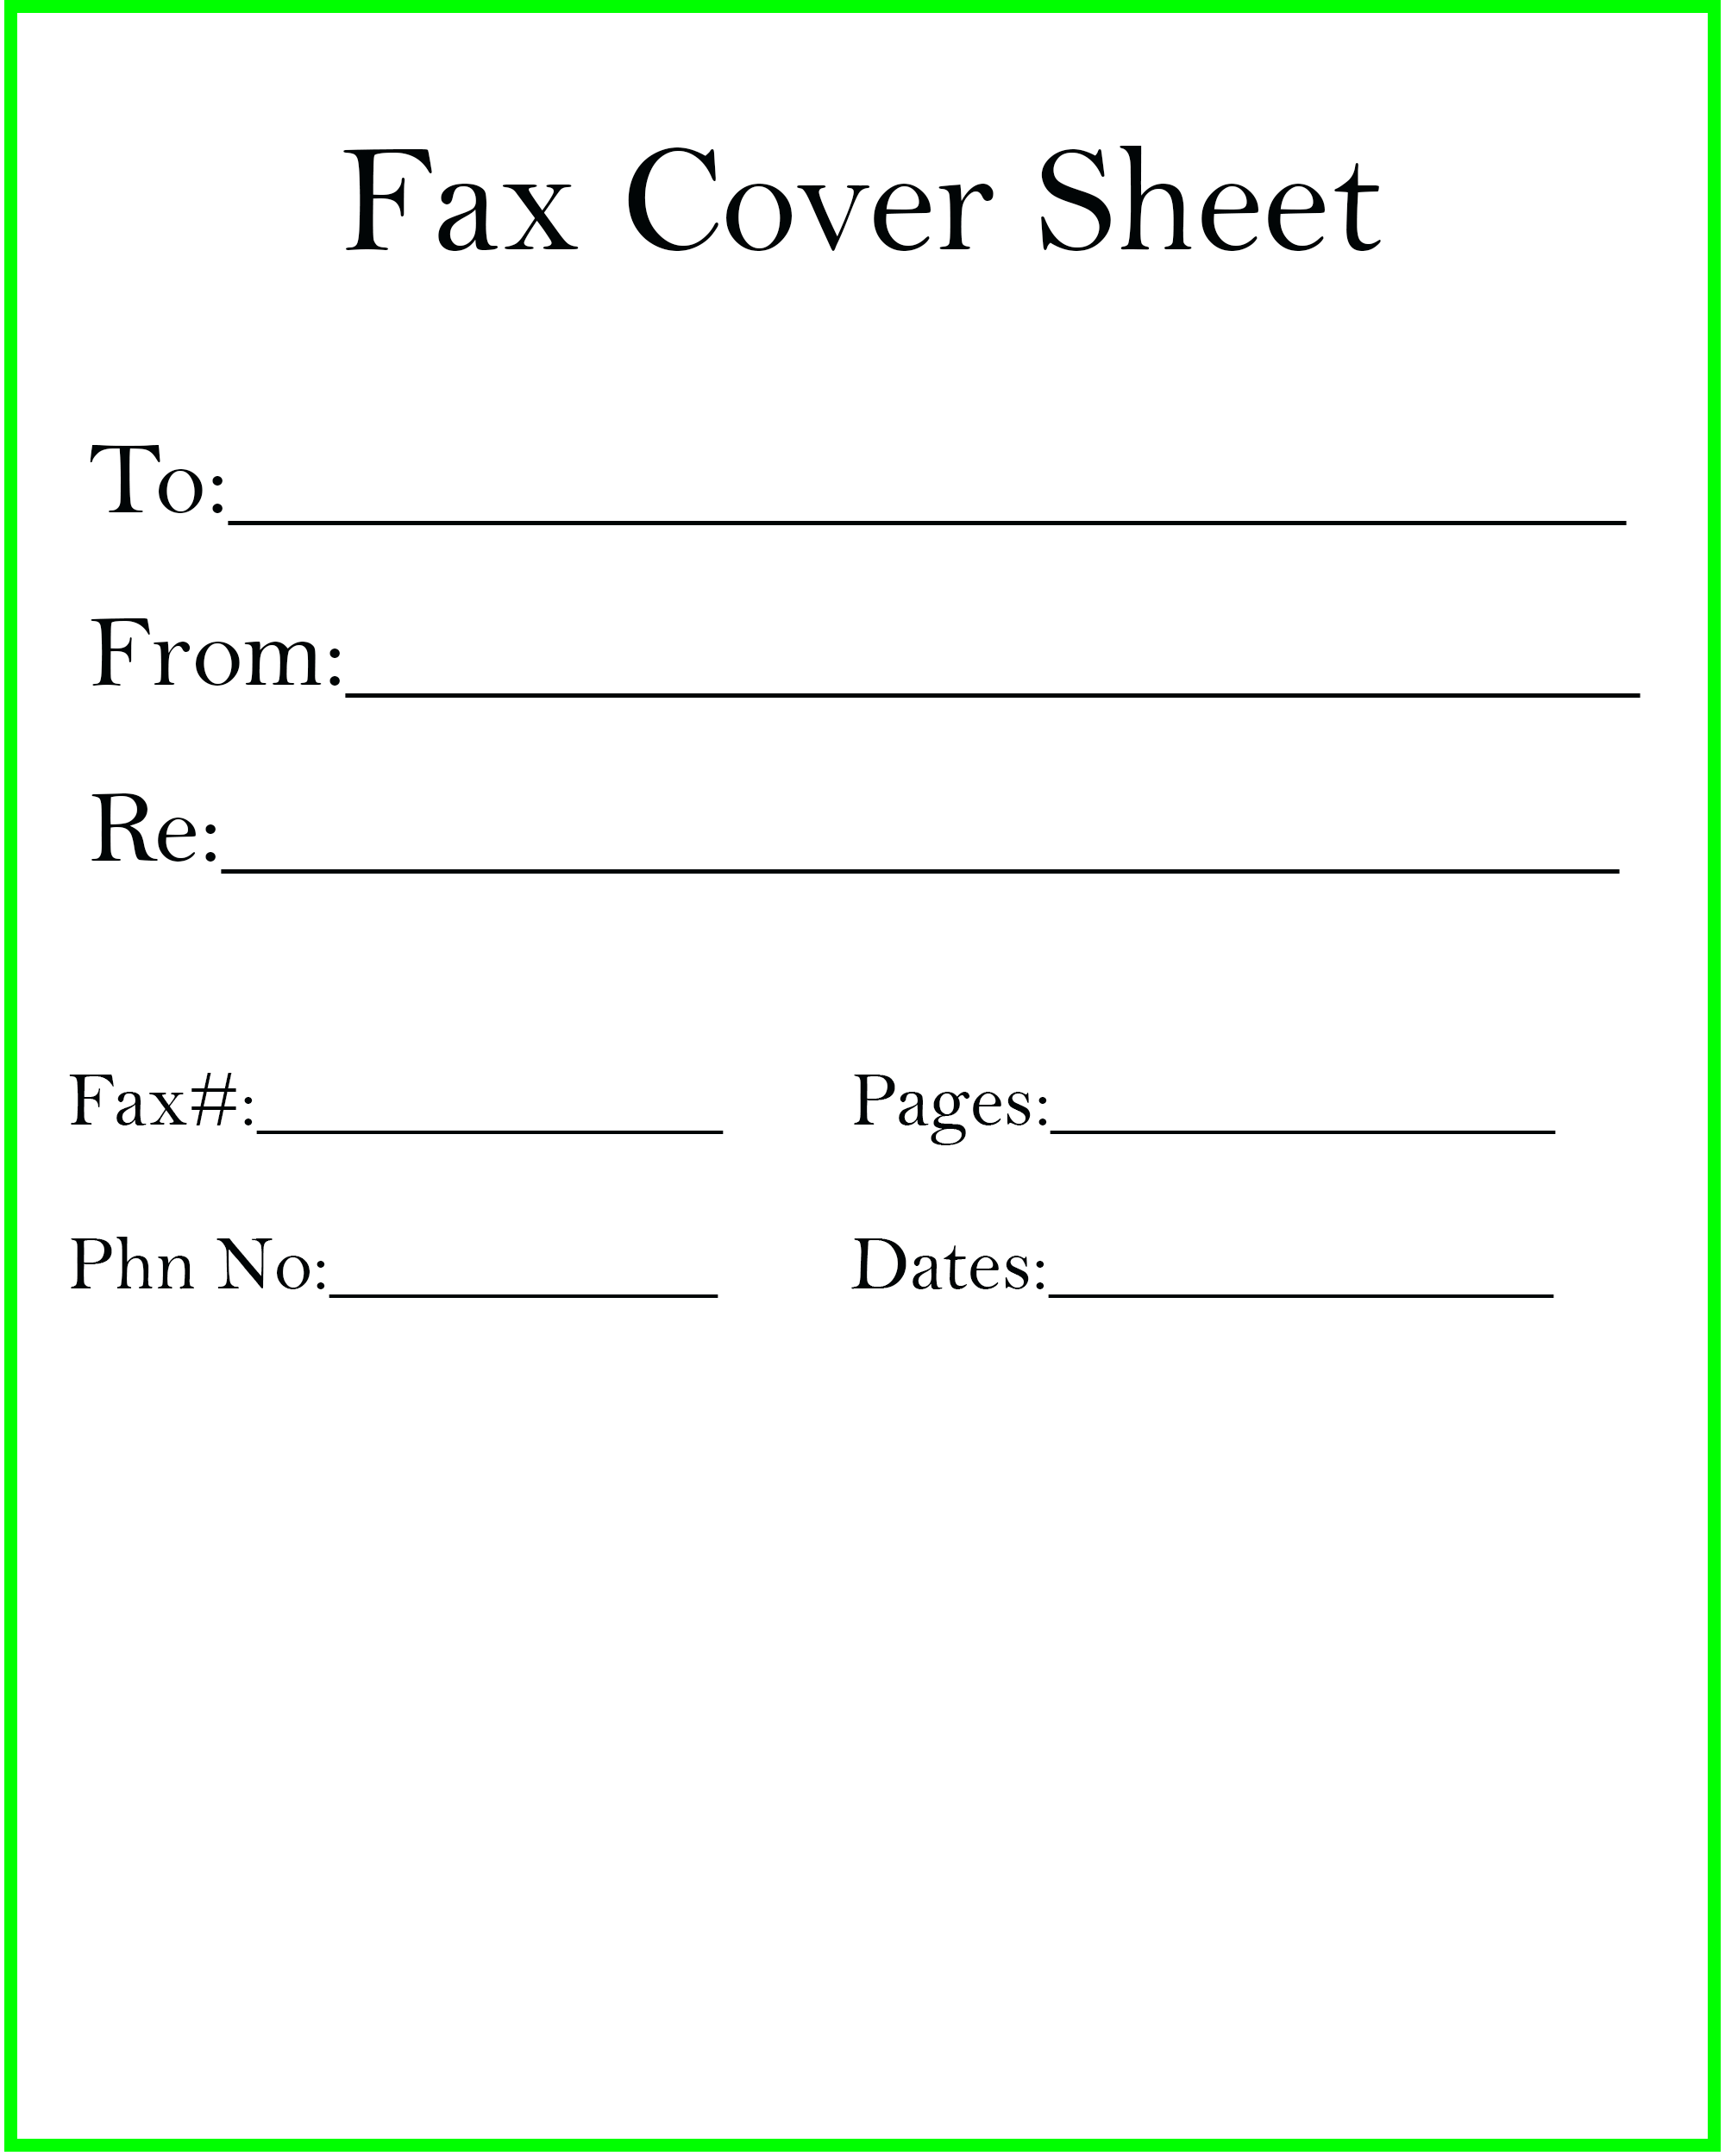 Fax Cover Sheet Template Sample